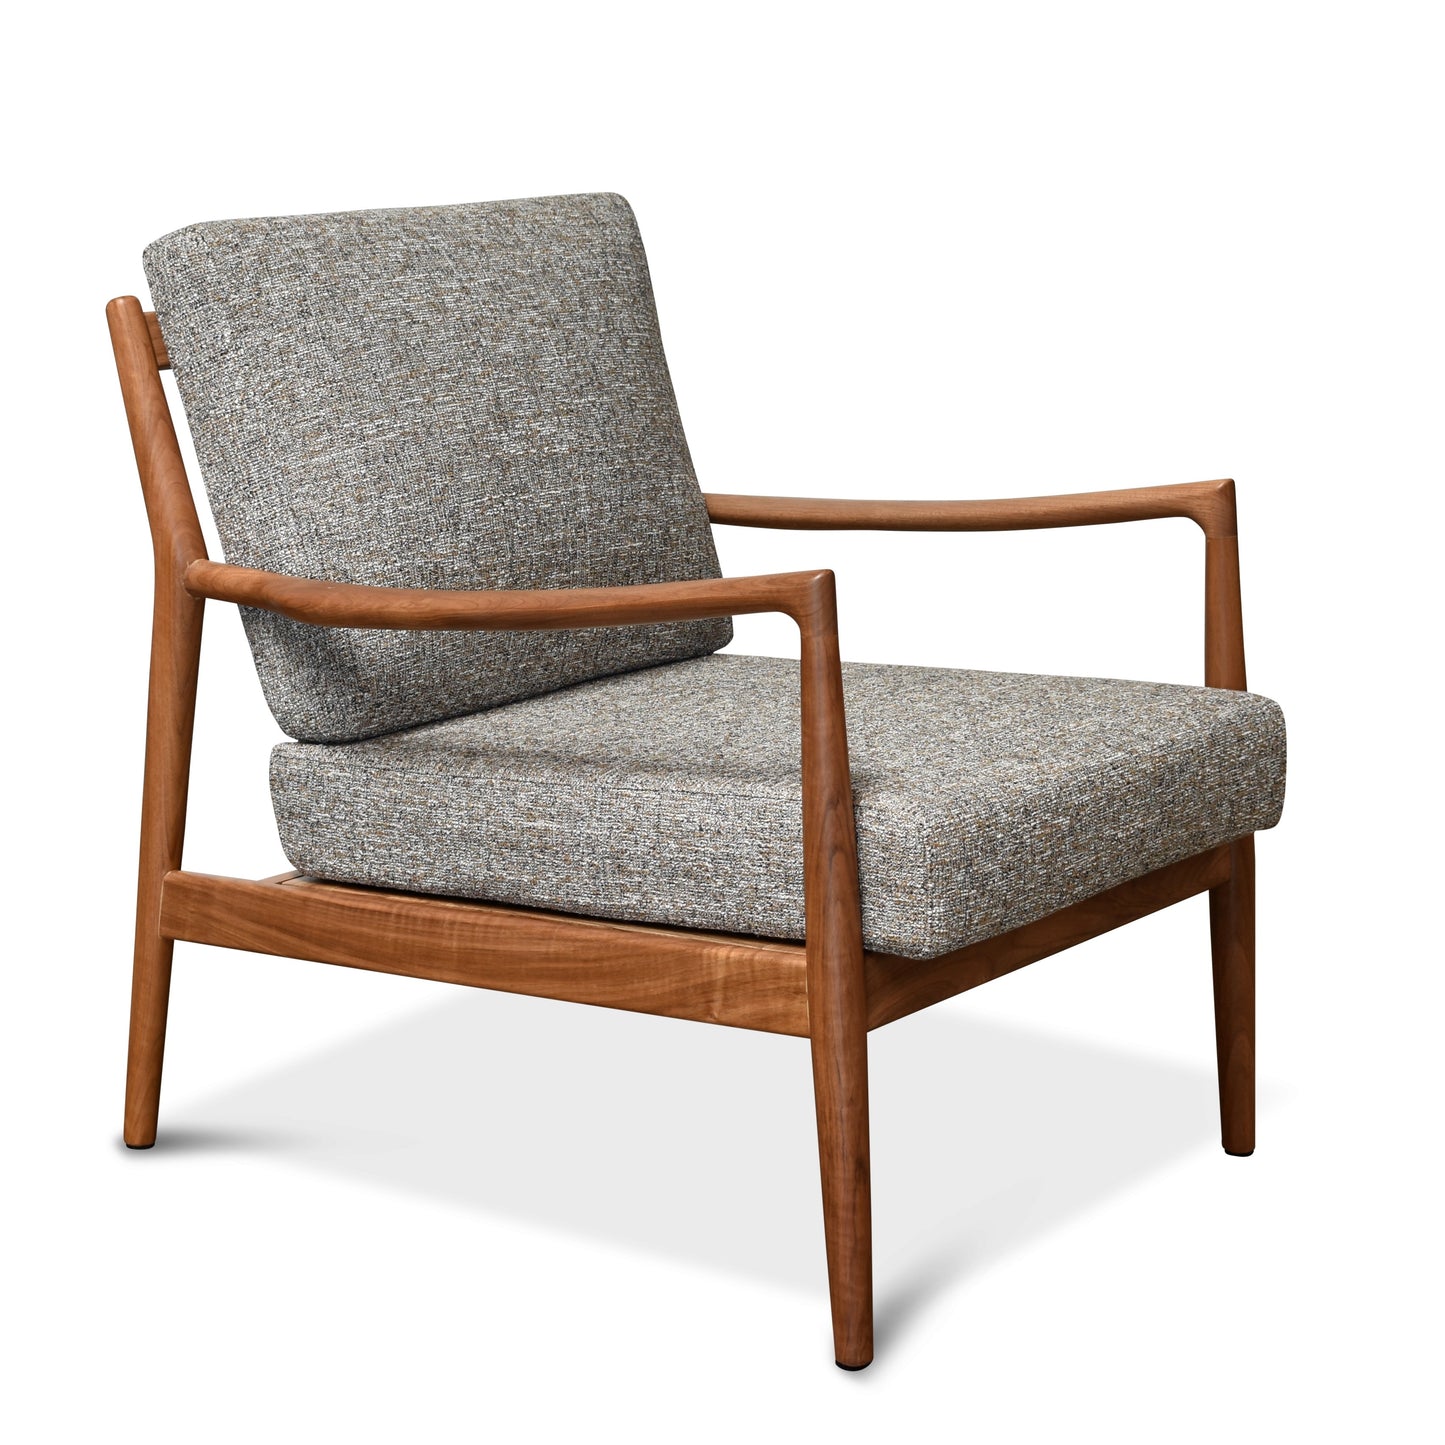 Load image into Gallery viewer, Stella Chair MineralLounge Chairs Gingko Furniture  Mineral   Four Hands, Burke Decor, Mid Century Modern Furniture, Old Bones Furniture Company, Old Bones Co, Modern Mid Century, Designer Furniture, https://www.oldbonesco.com/
